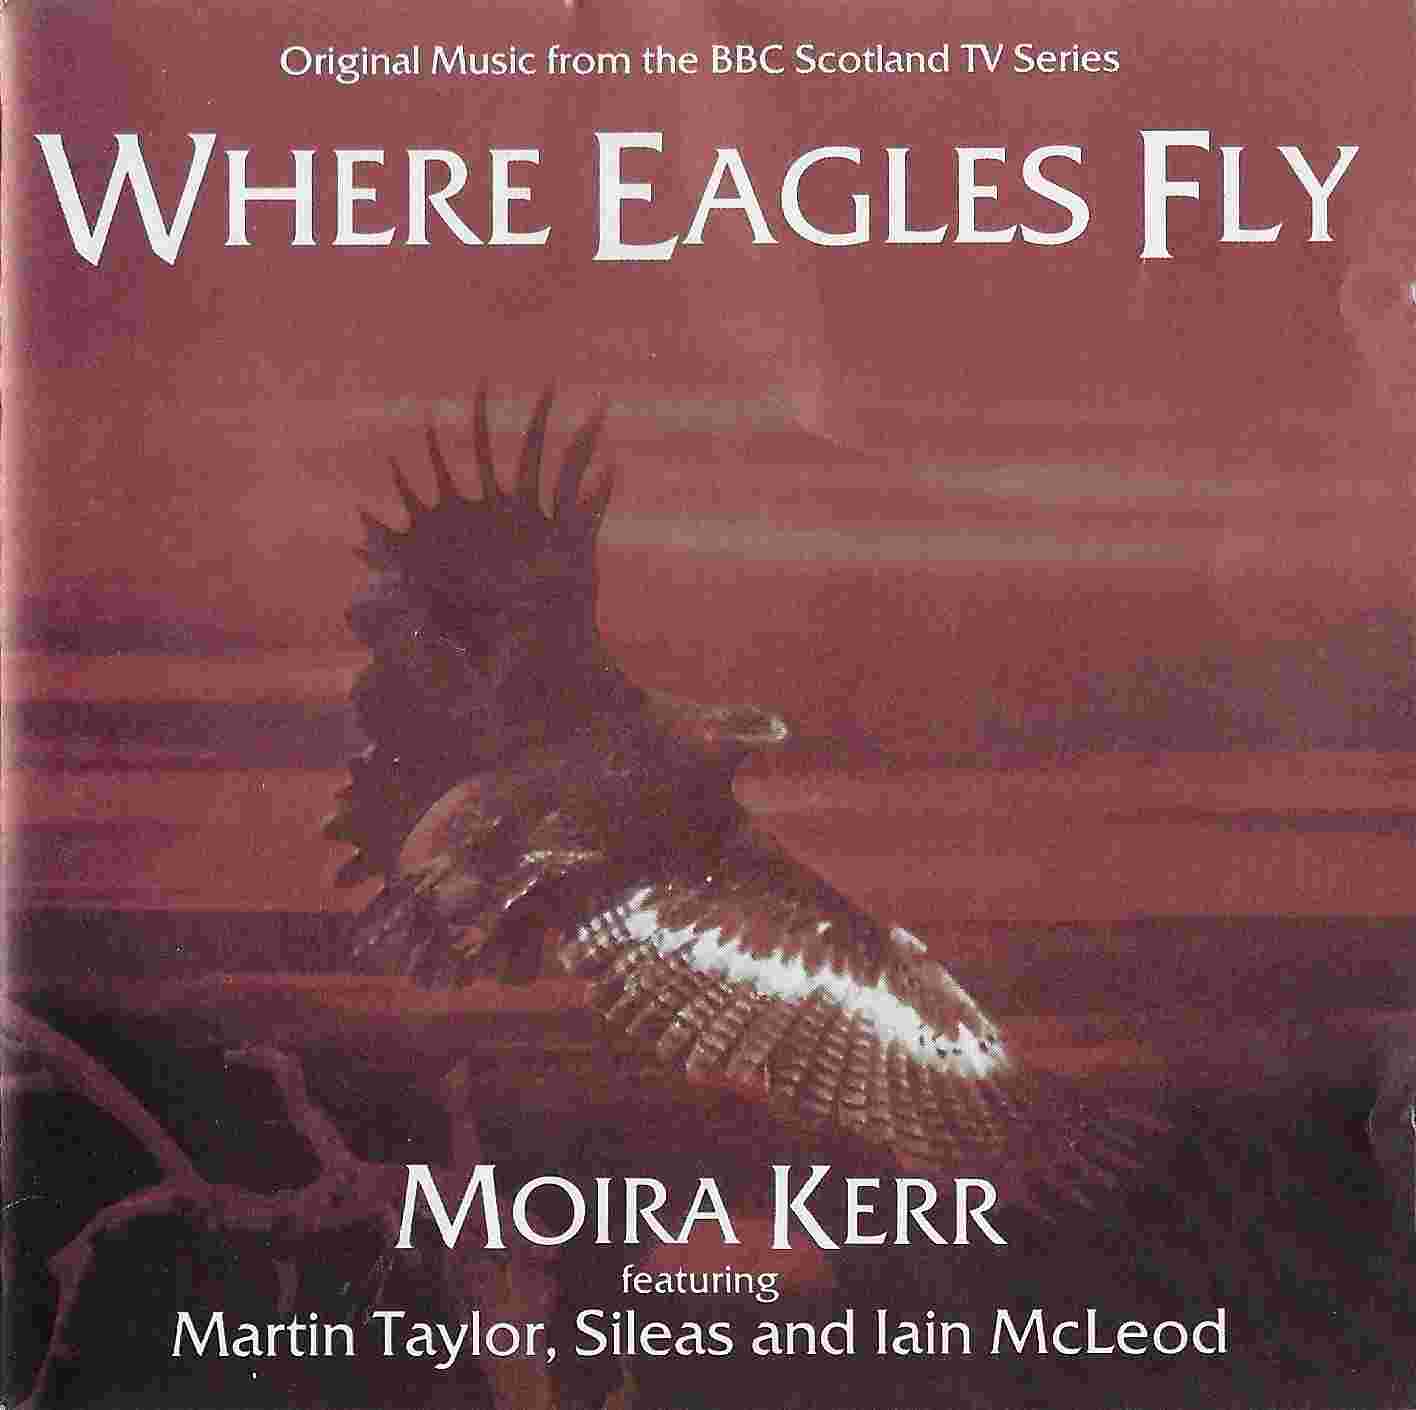 Picture of Where eagles fly by artist Moira Kerr from the BBC cds - Records and Tapes library